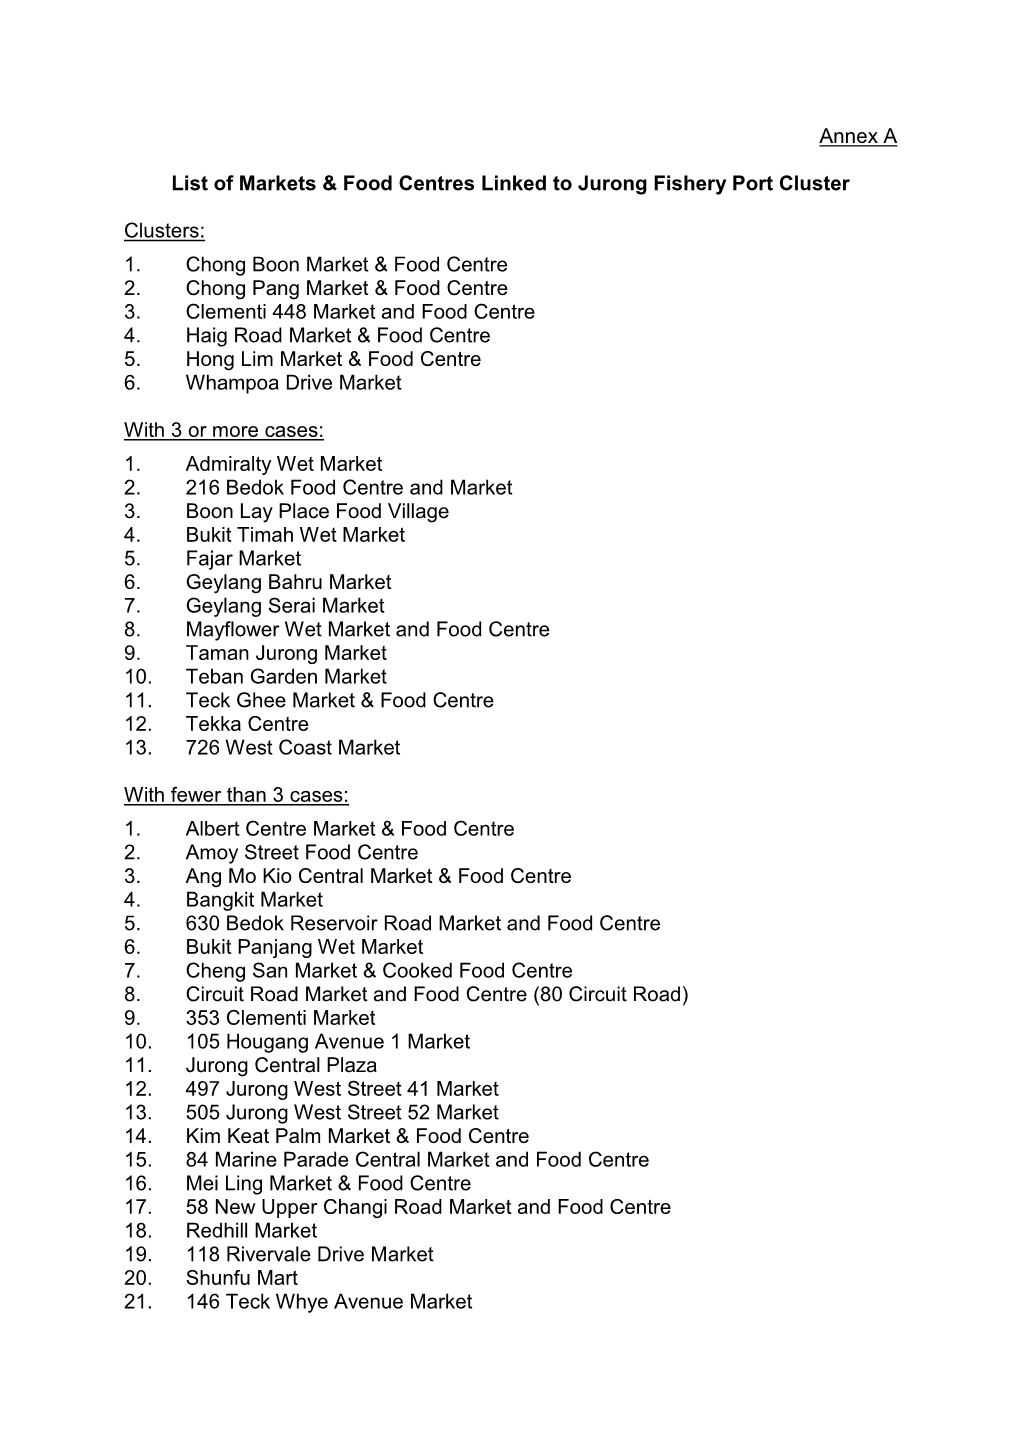 Annex a List of Markets & Food Centres Linked to Jurong Fishery